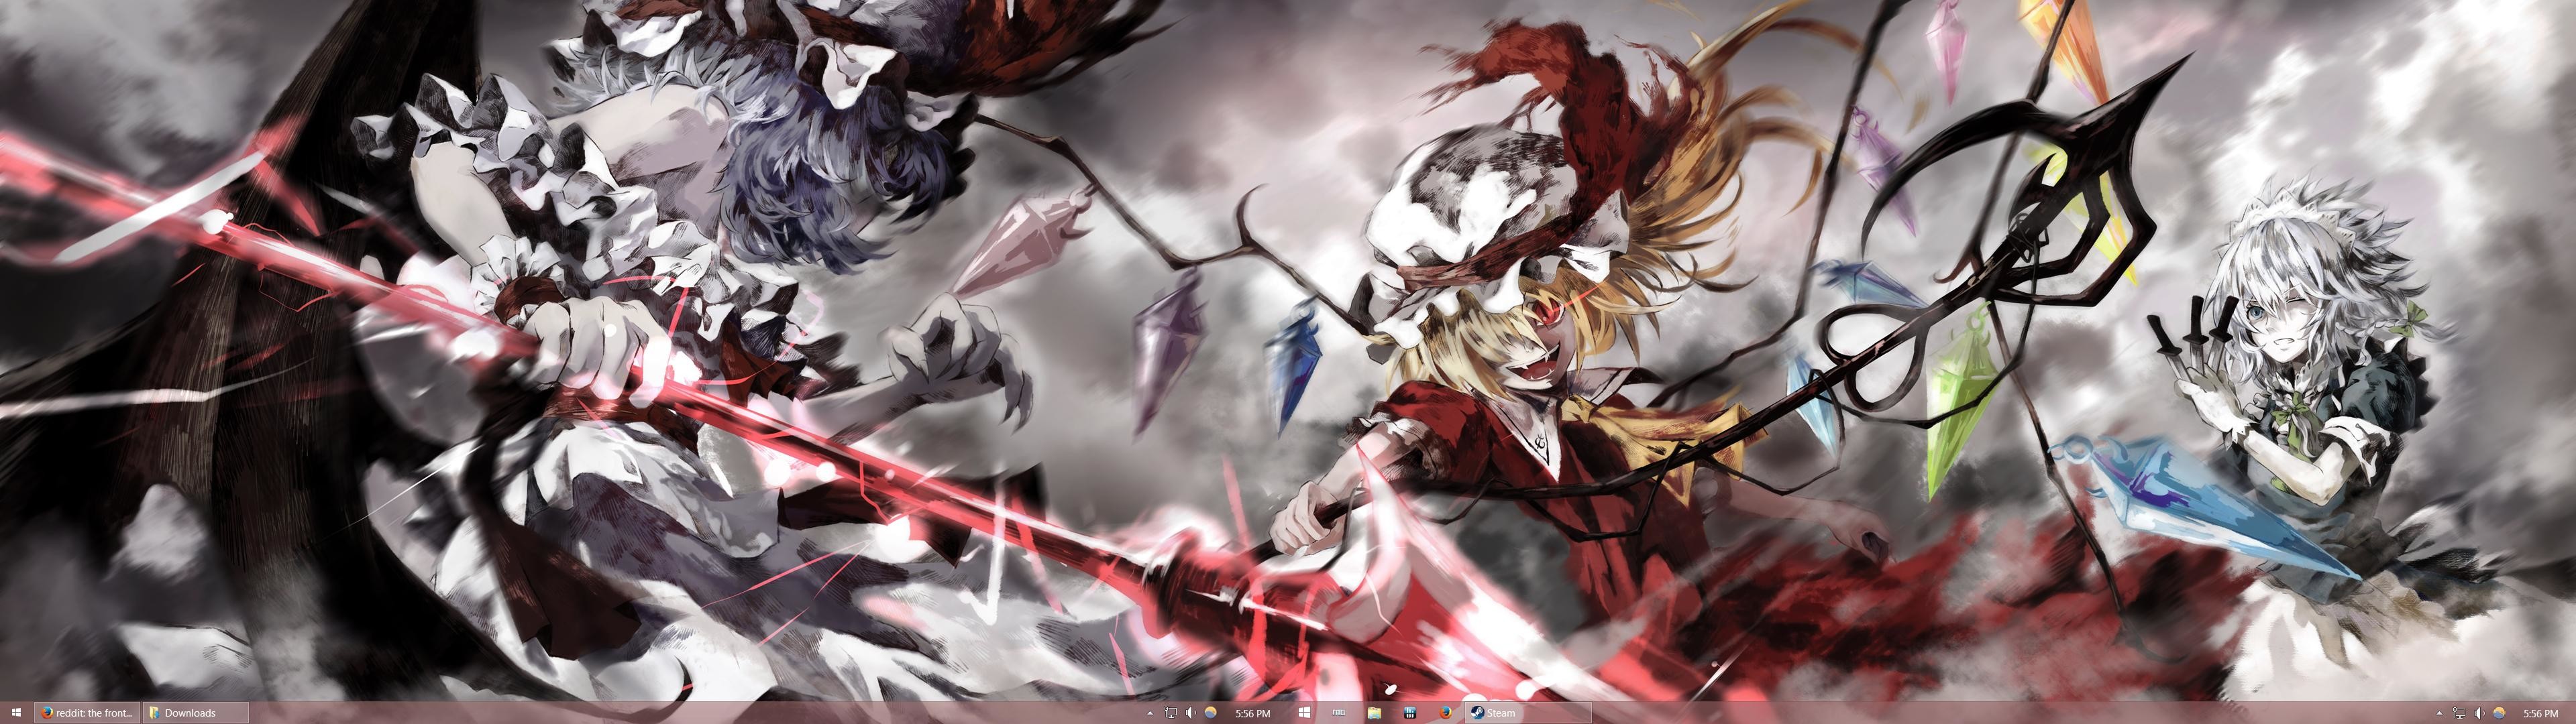 3840x1080 Anyone have Touhou-related dual screen wallpapers?